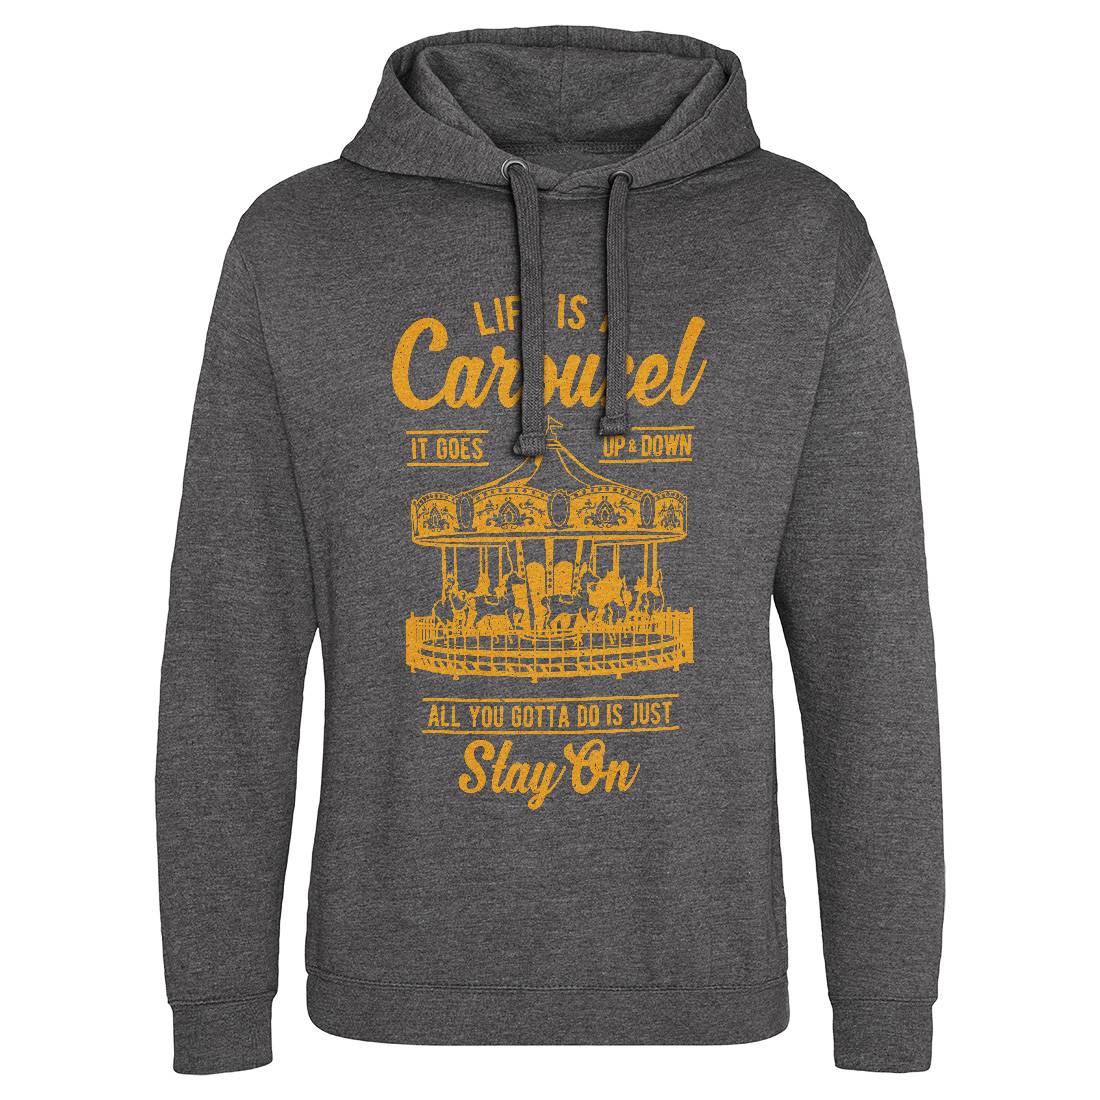 Carousel Mens Hoodie Without Pocket Retro A633